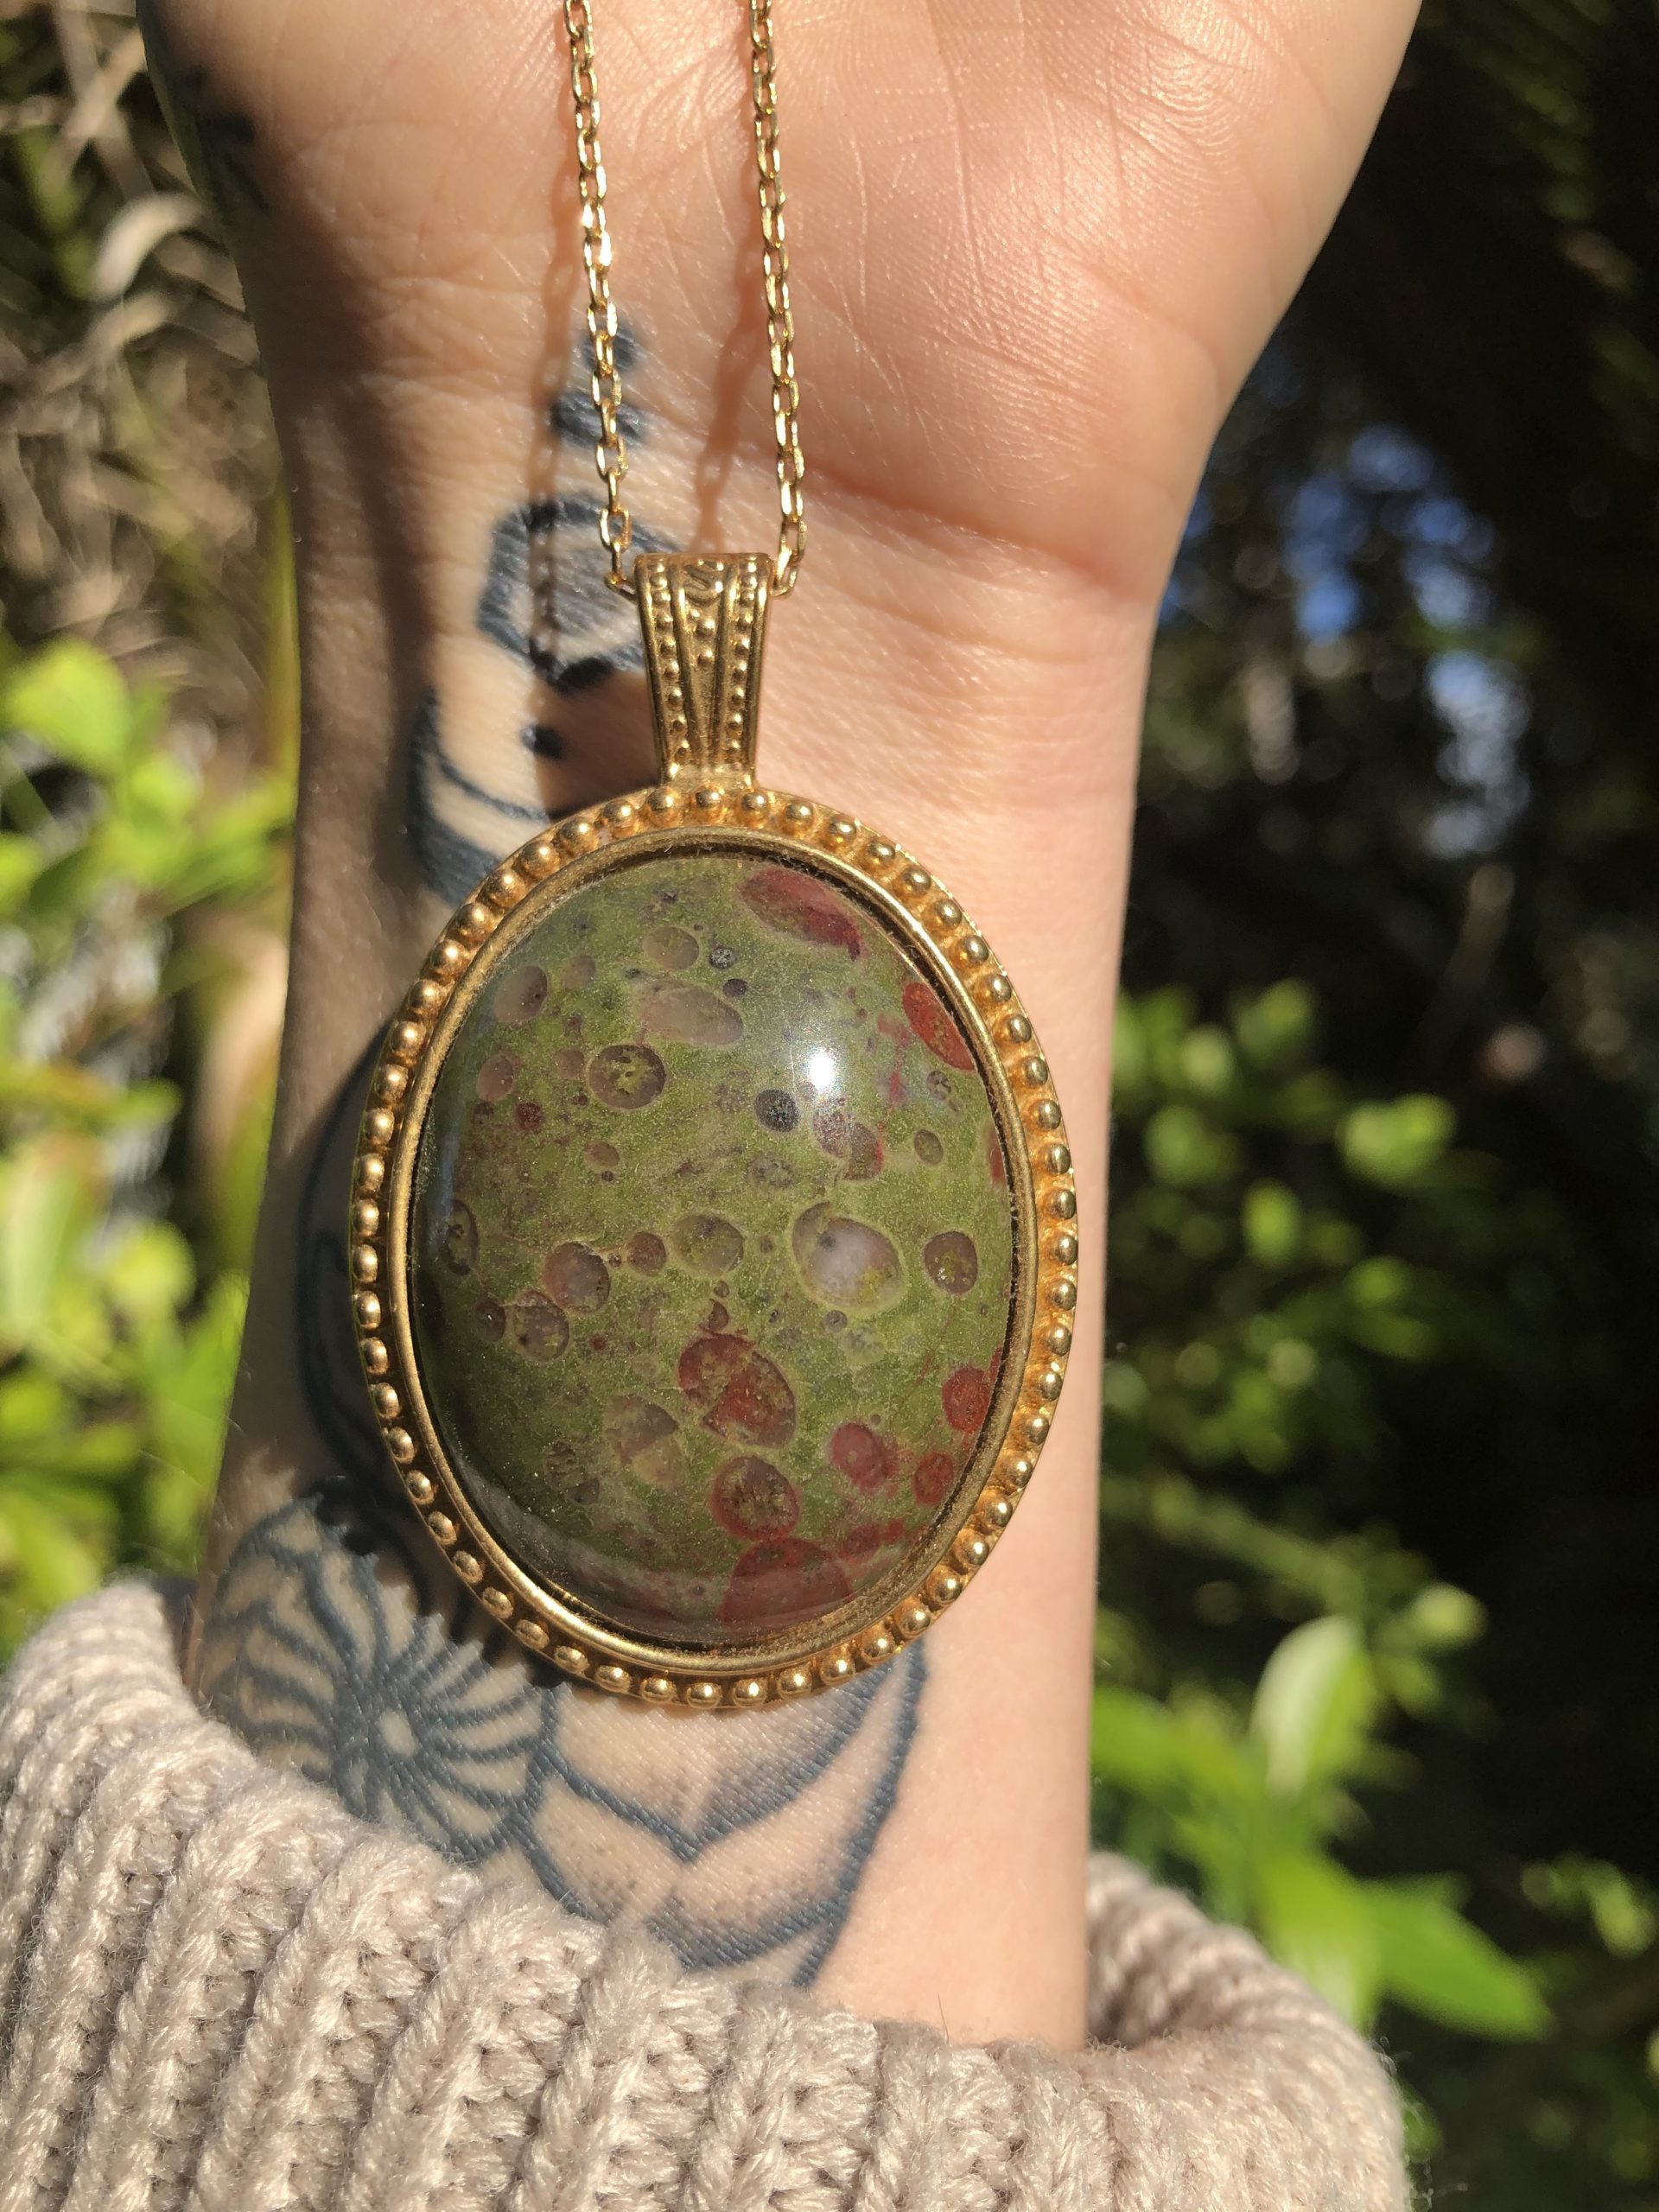 Necklace with rare New Zealand reverse poppy jasper with red poppy dots on a background of green jasper, hand polished into a 40x30mm cabochon and set into a gold plated setting with 19 inch chain - held